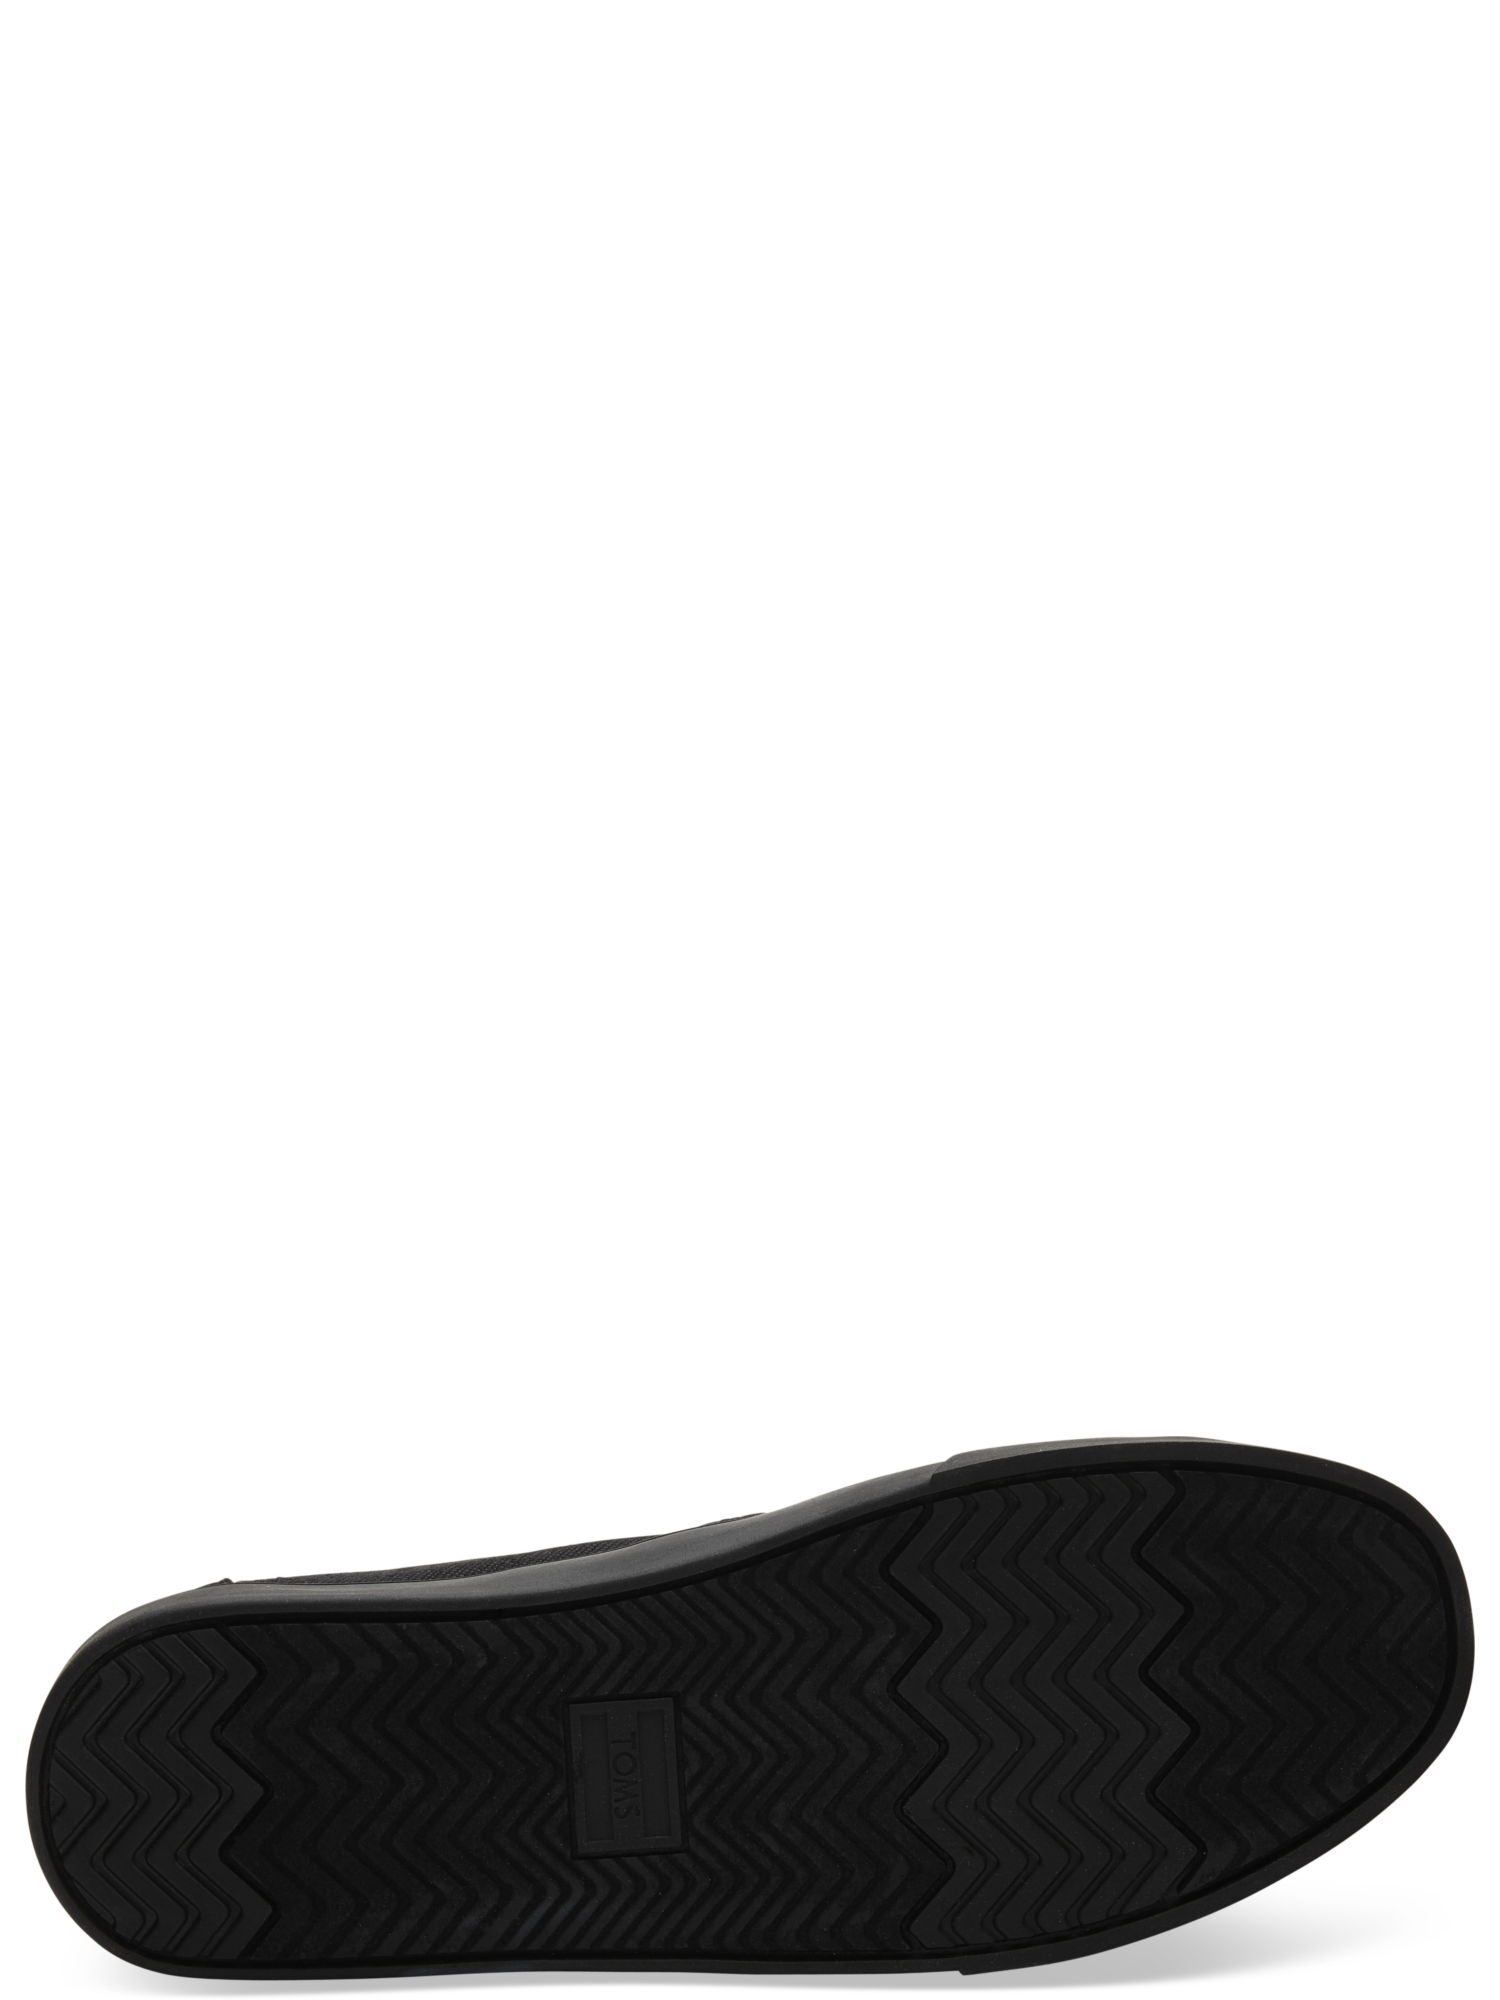 TOMS Men's on Canvas Cupsole Classic Slip-On Shoes - image 3 of 3